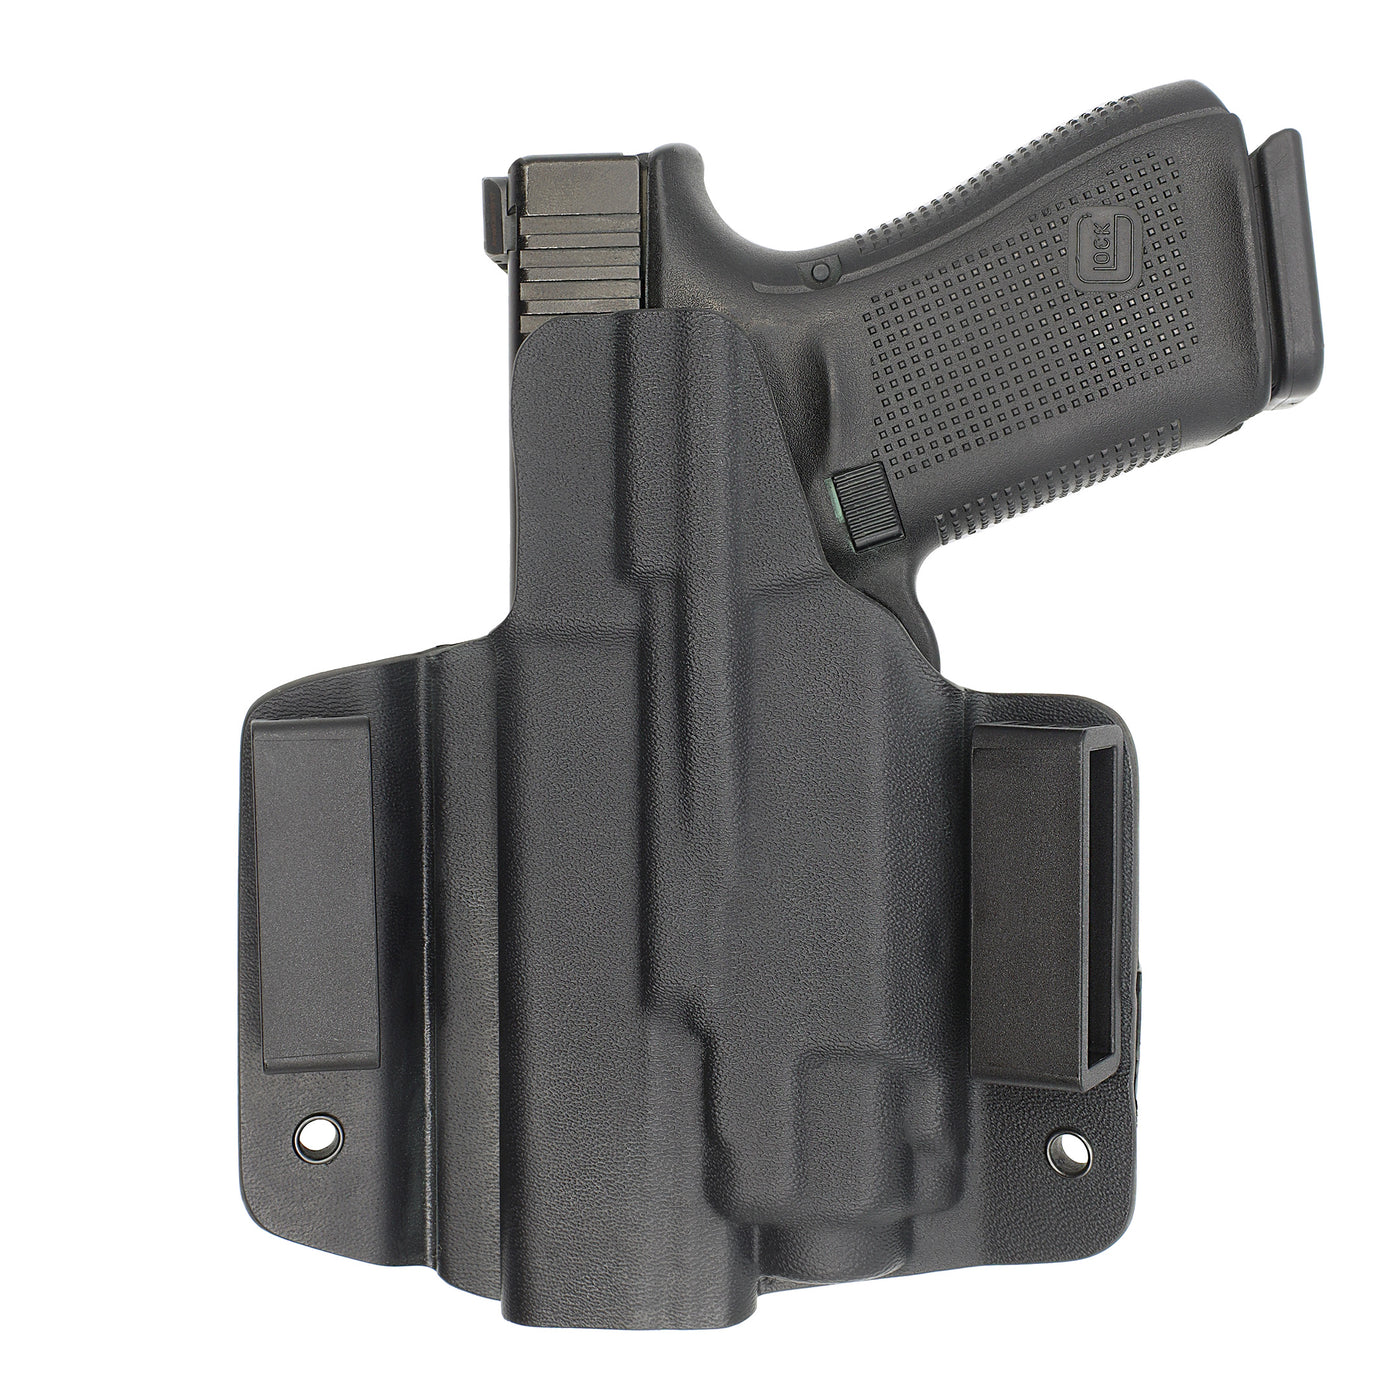 C&G Holsters custom OWB Tactical CZ P10/c Streamlight TLR8 holstered back view